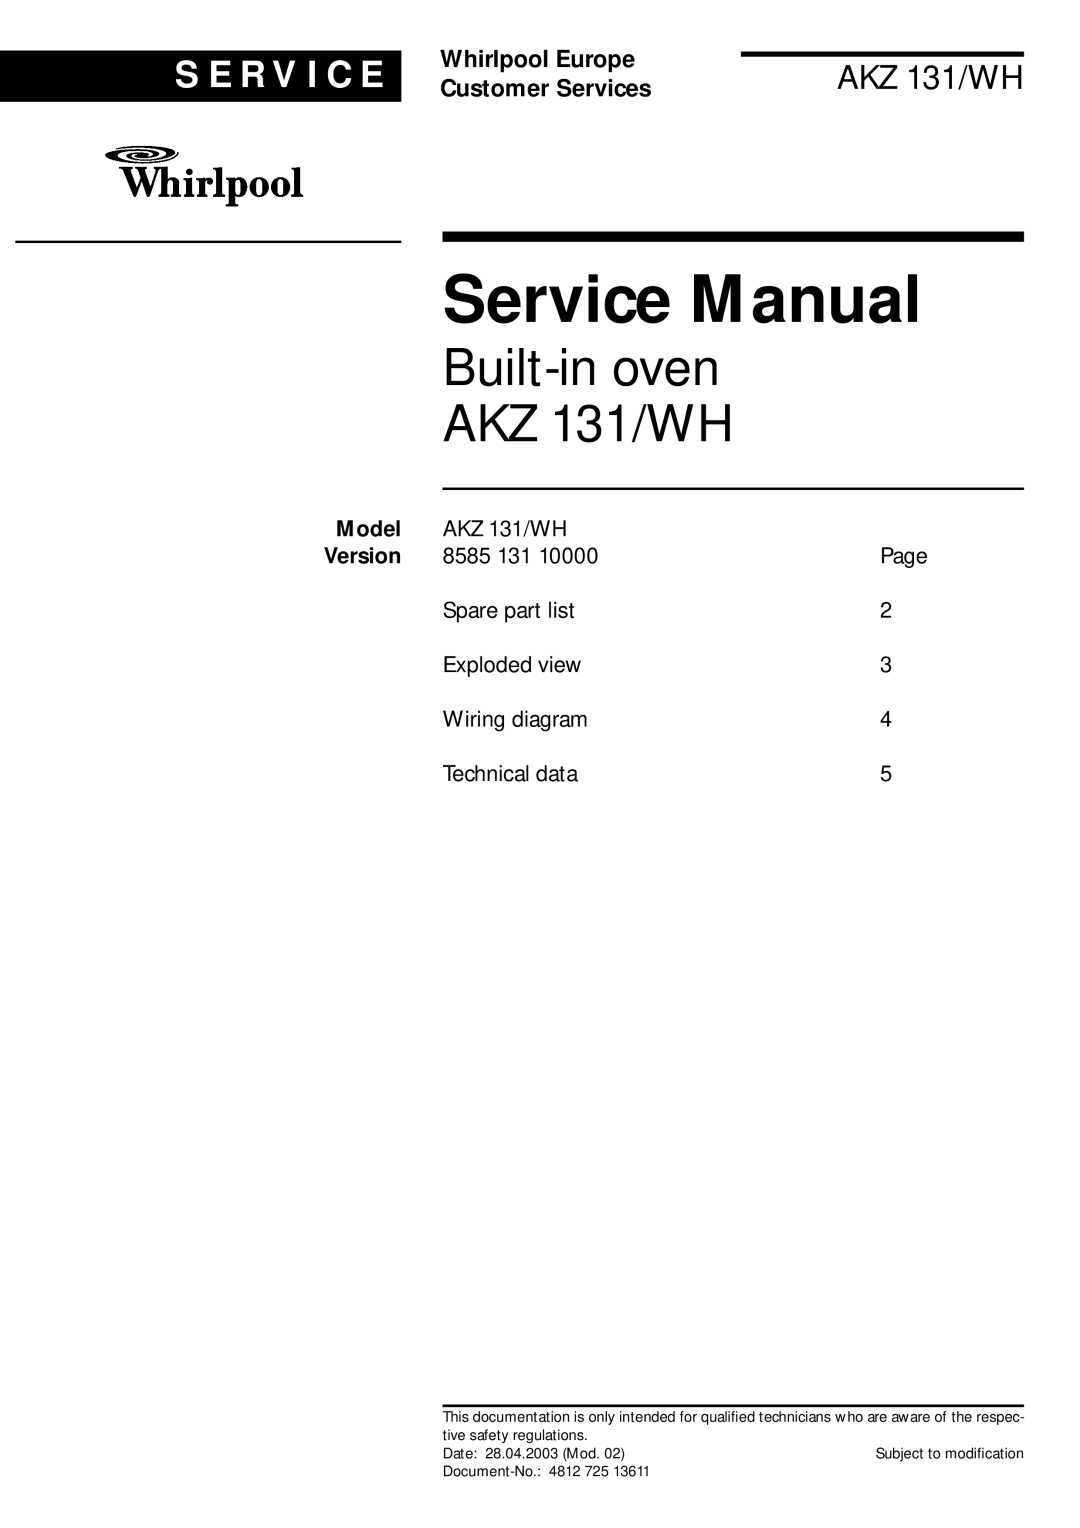 Whirlpool AKZ 131 WH service manual Model, Built-inoven AKZ 131/WH, S E R V I C E, Whirlpool Europe, Customer Services 